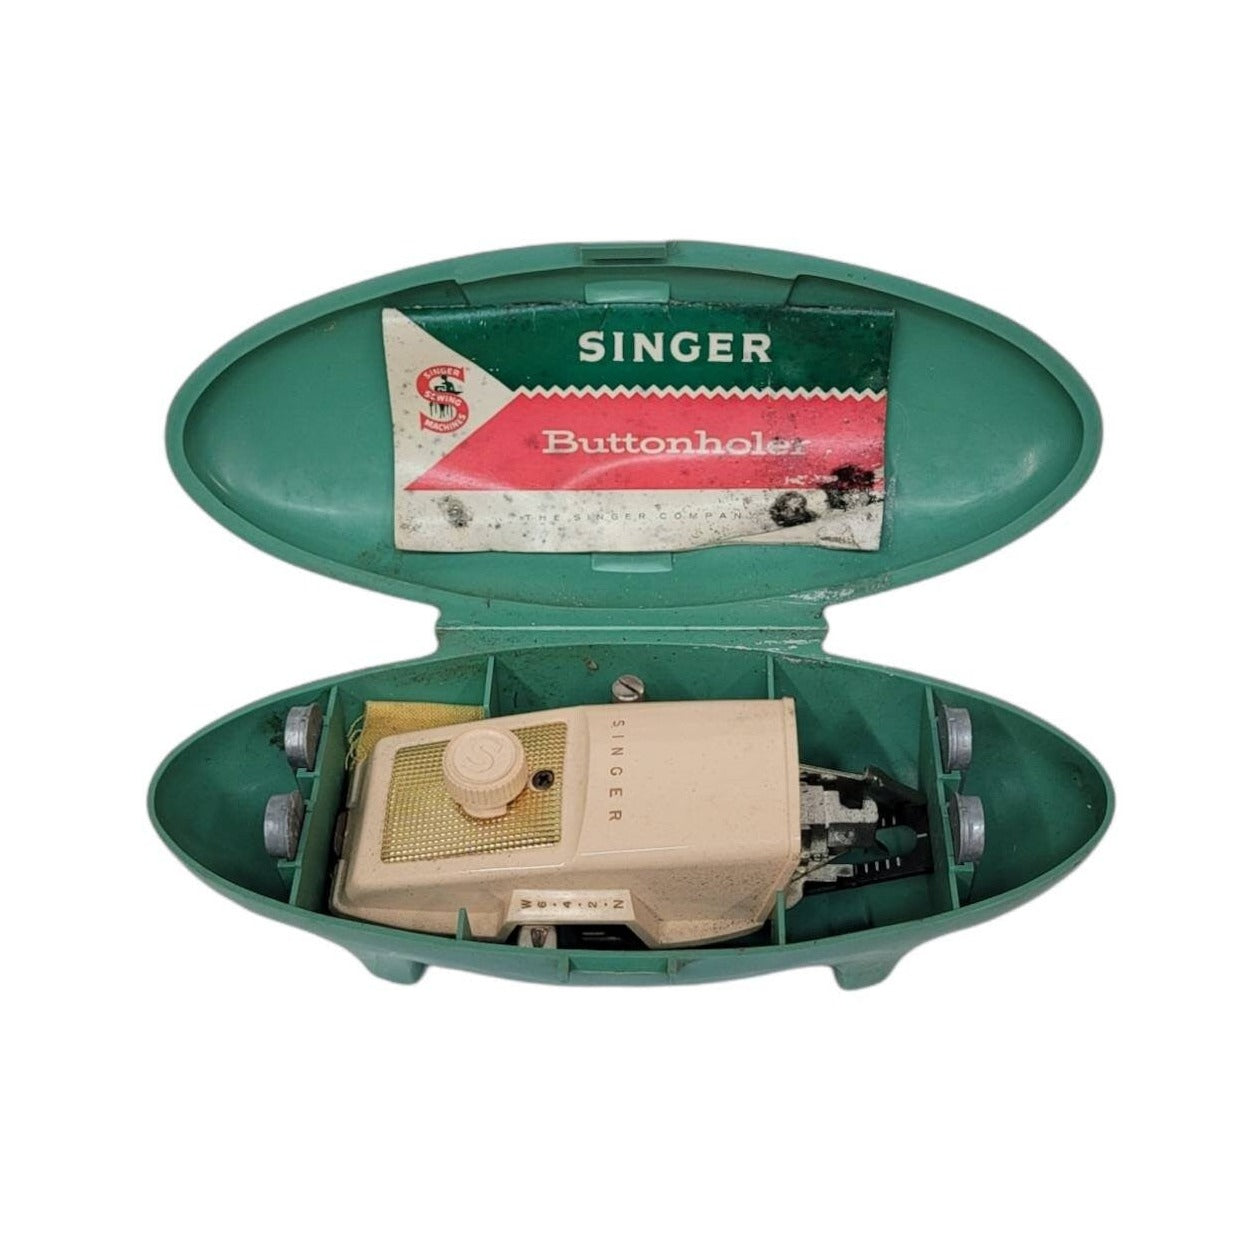 singer sewing buttonholer machine with attachments in box